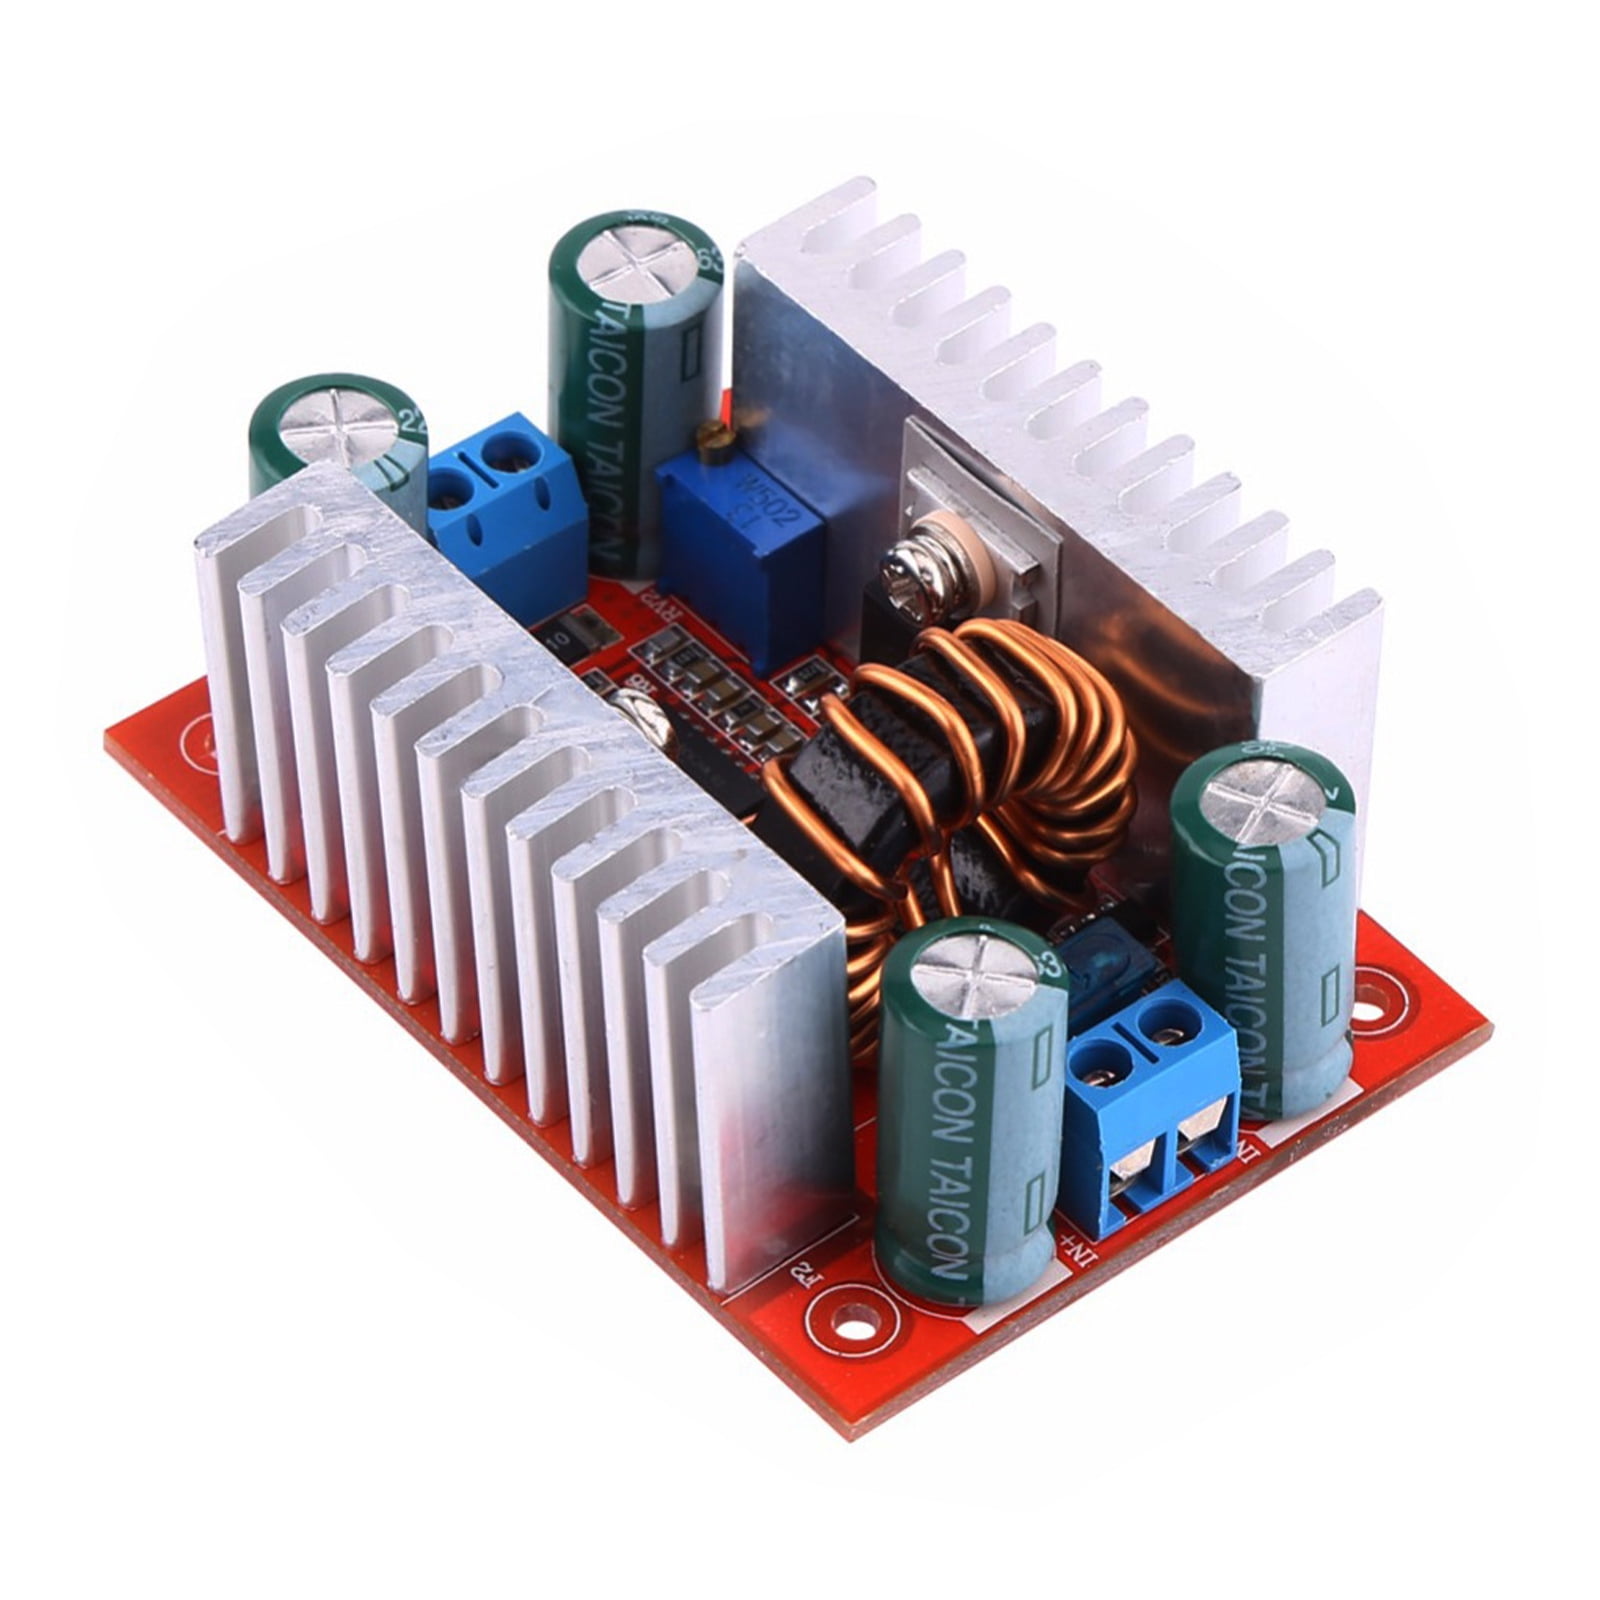 DC 400W 15A Step-up Boost Converter Constant Current Power Supply LED  Driver 8.5-50V to 10-60V Voltage Charger Module - AliExpress